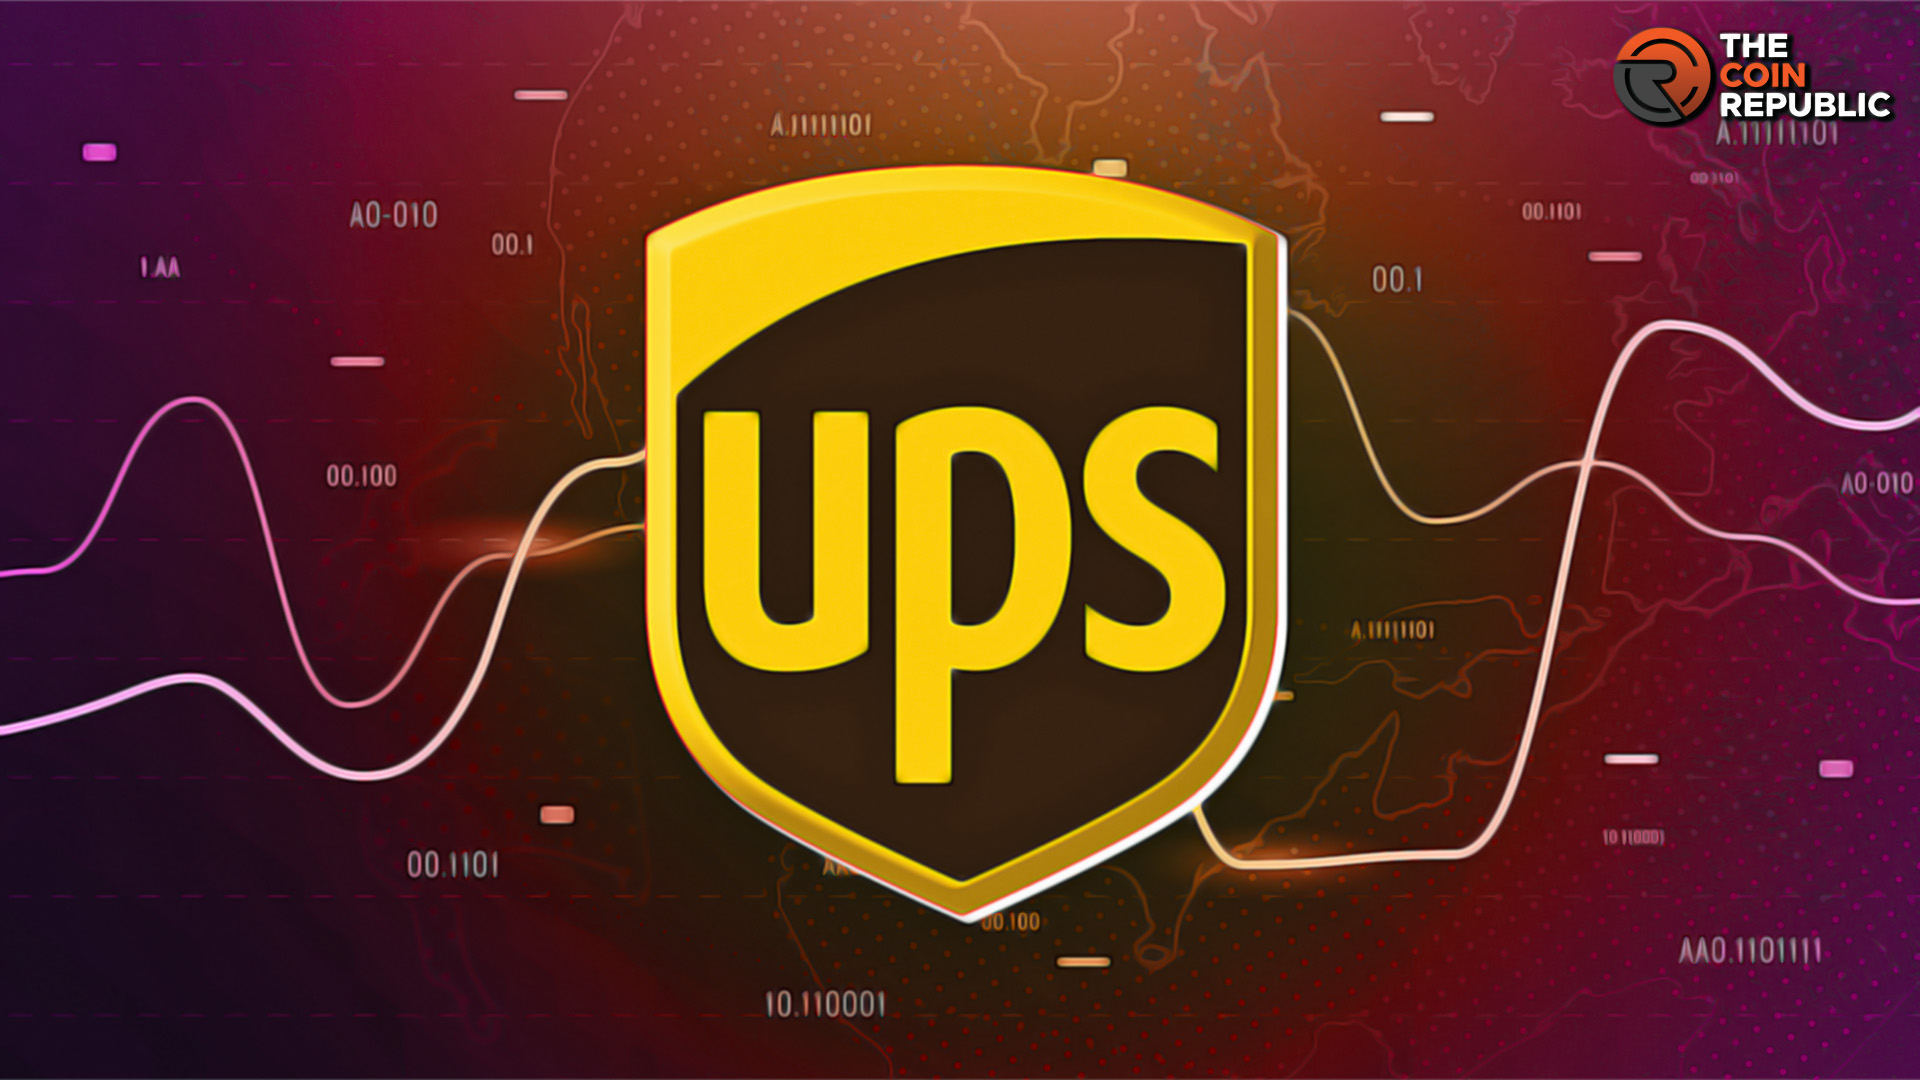 United Parcel Service Inc.: UPS Stock Price May Rebound on Monday